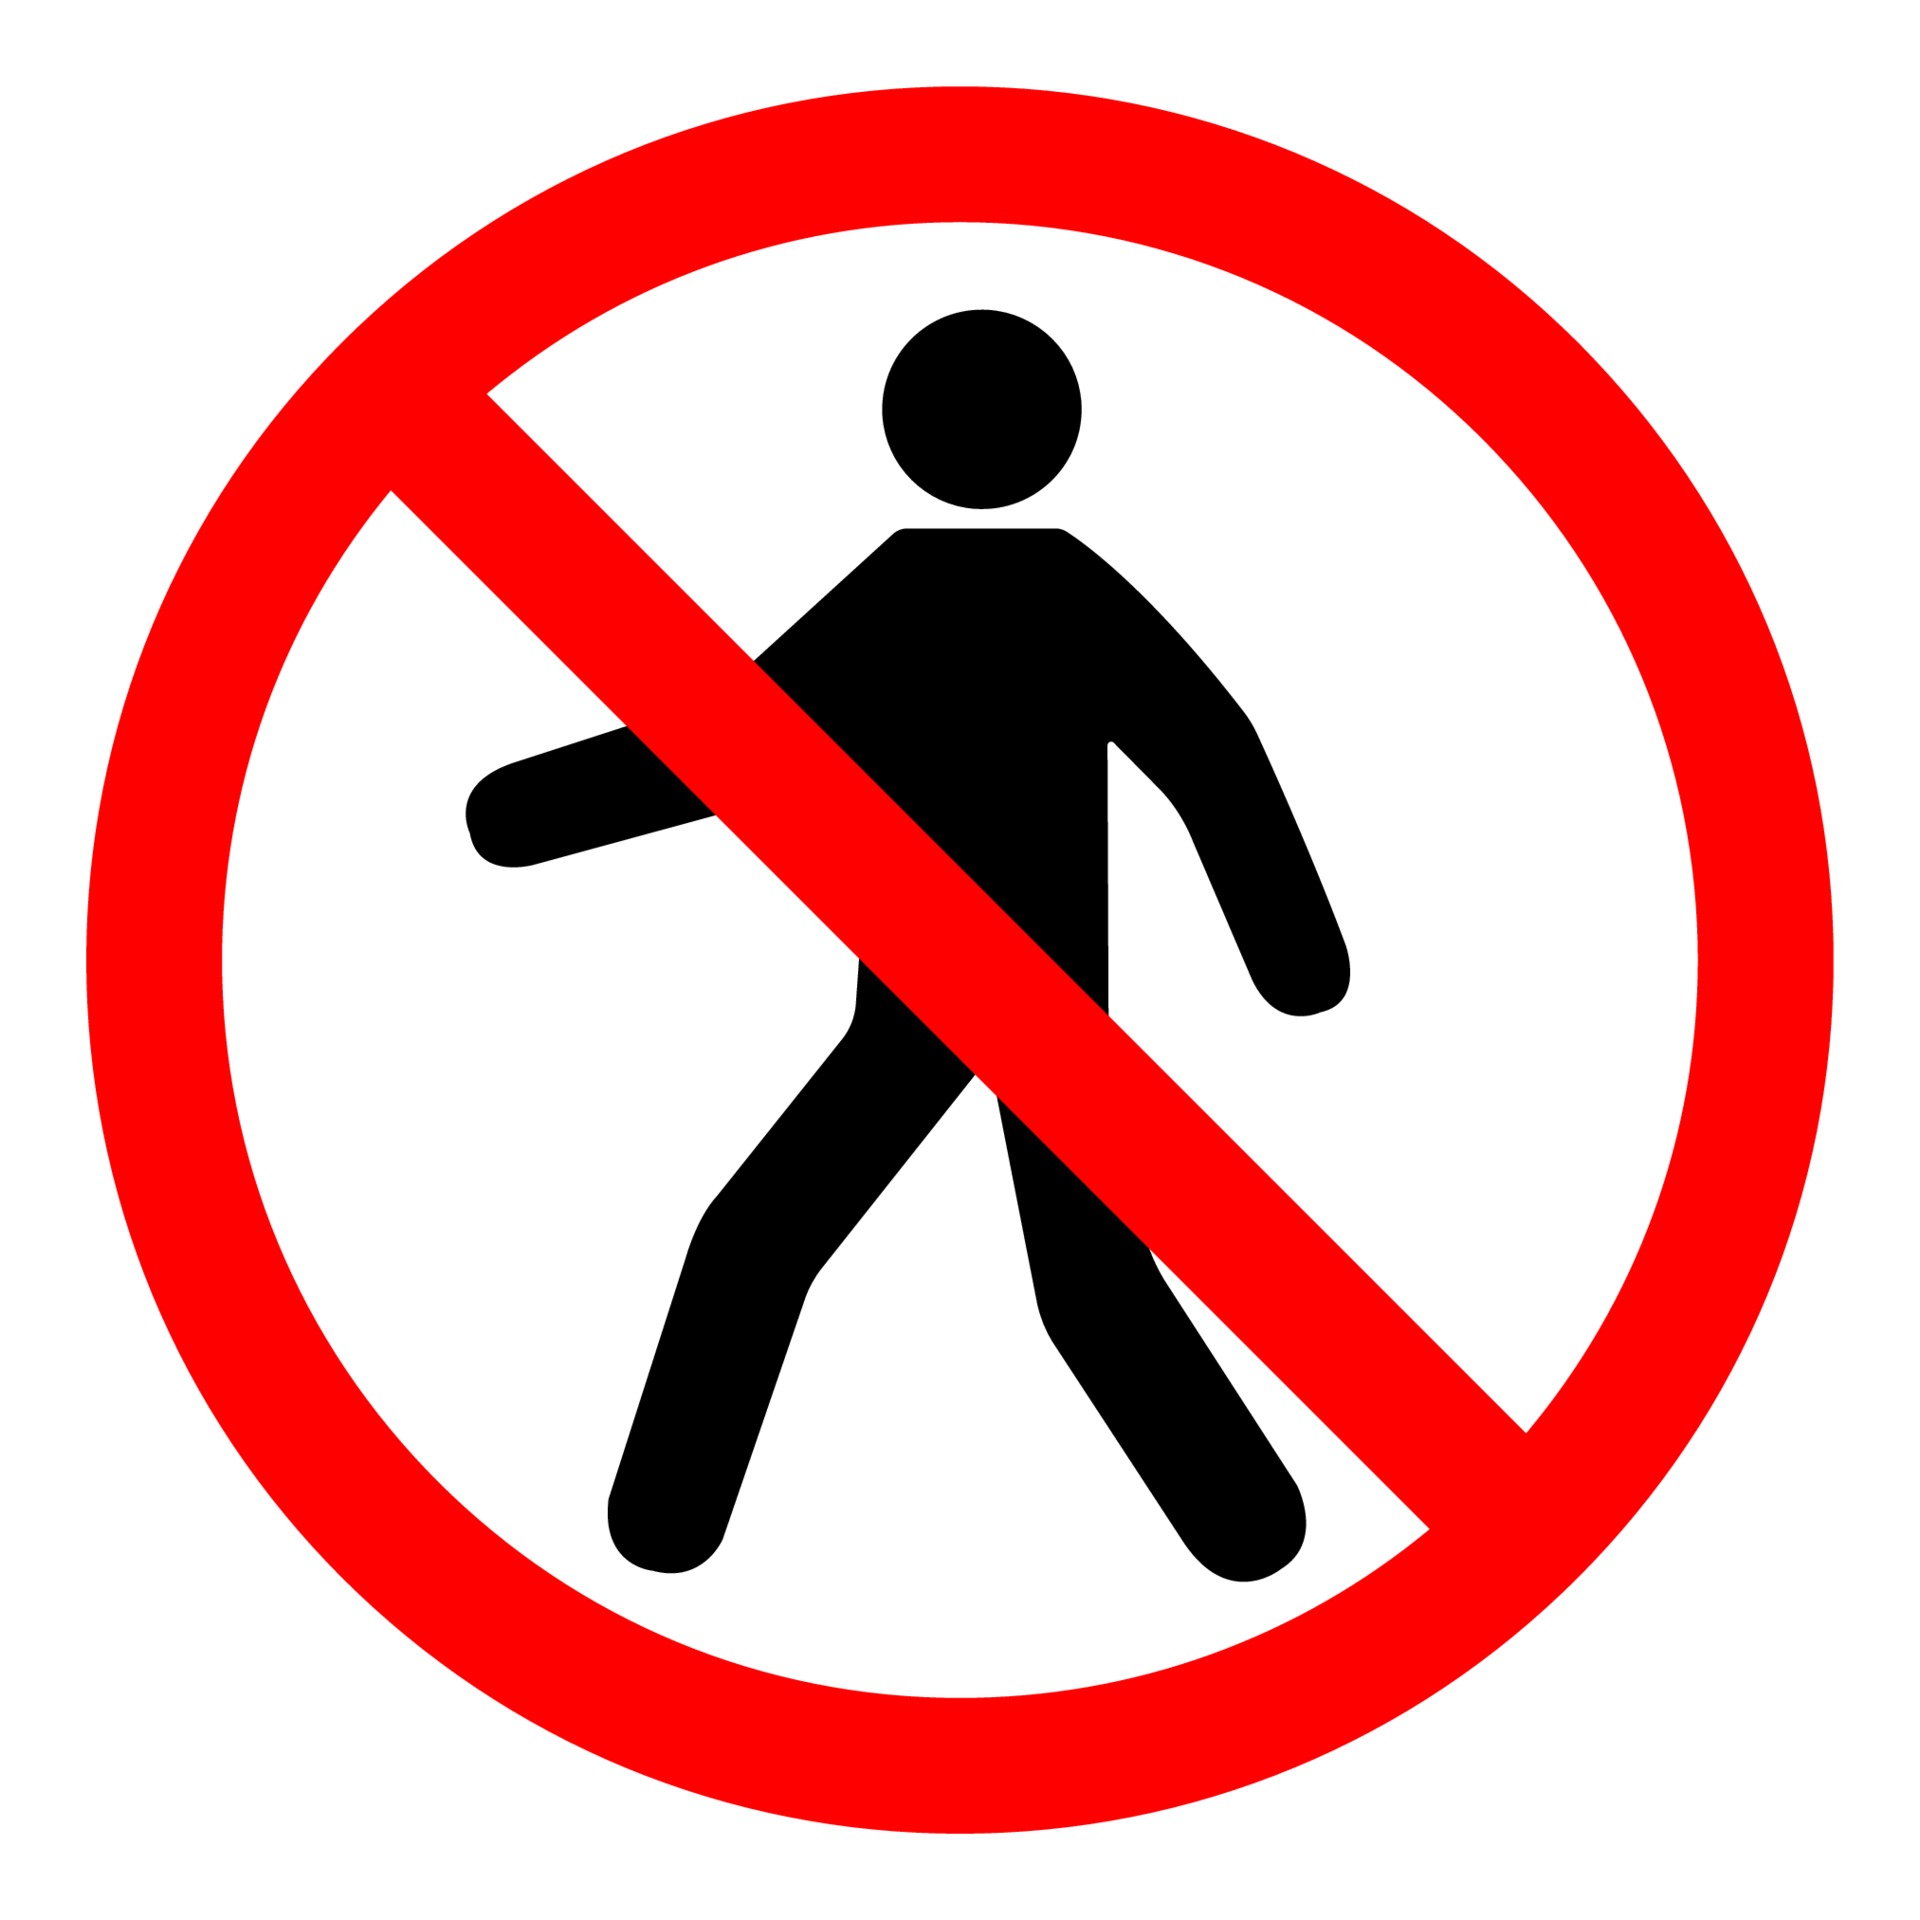 No Entry Sign Clip Art Free Vector In Open Office Dra - vrogue.co